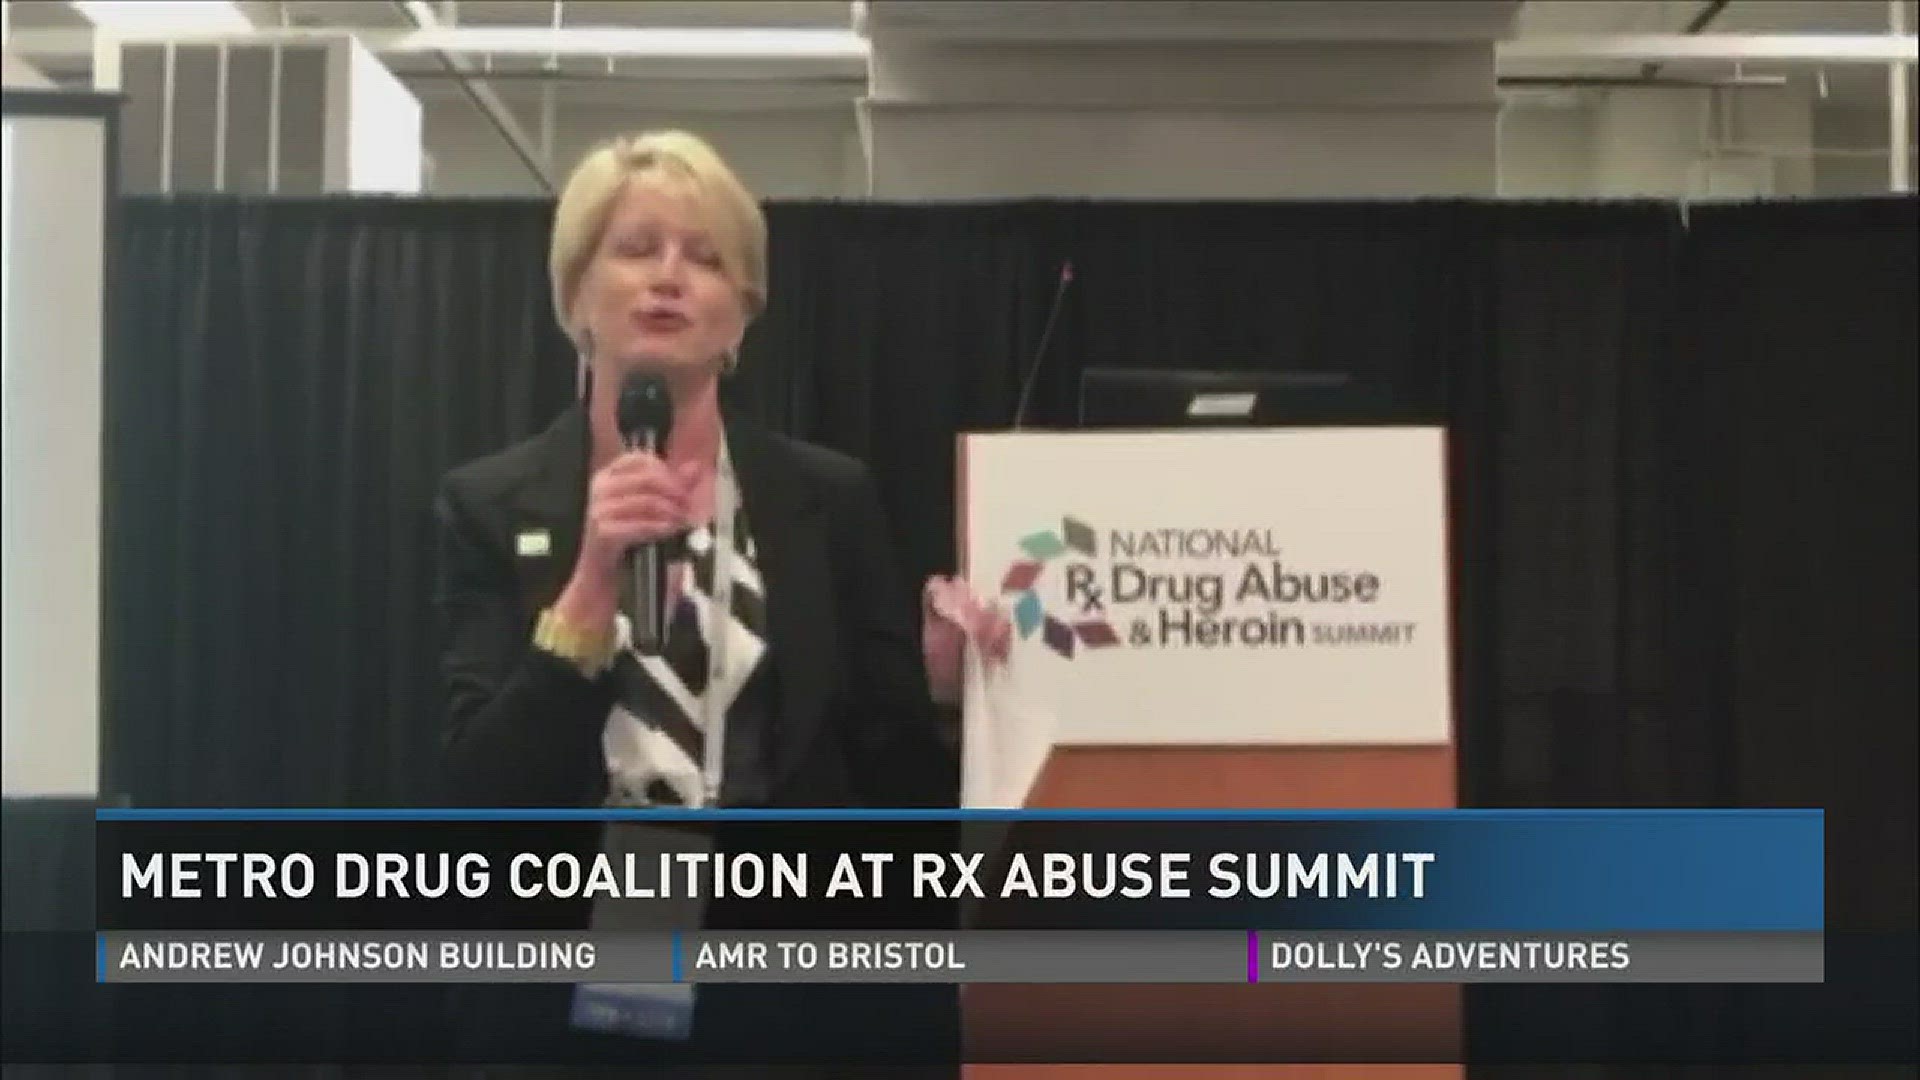 April 18, 2017: An anti-drug group in Knoxville is a key focus of national summit this week targeting the opioid epidemic and how to fight it.